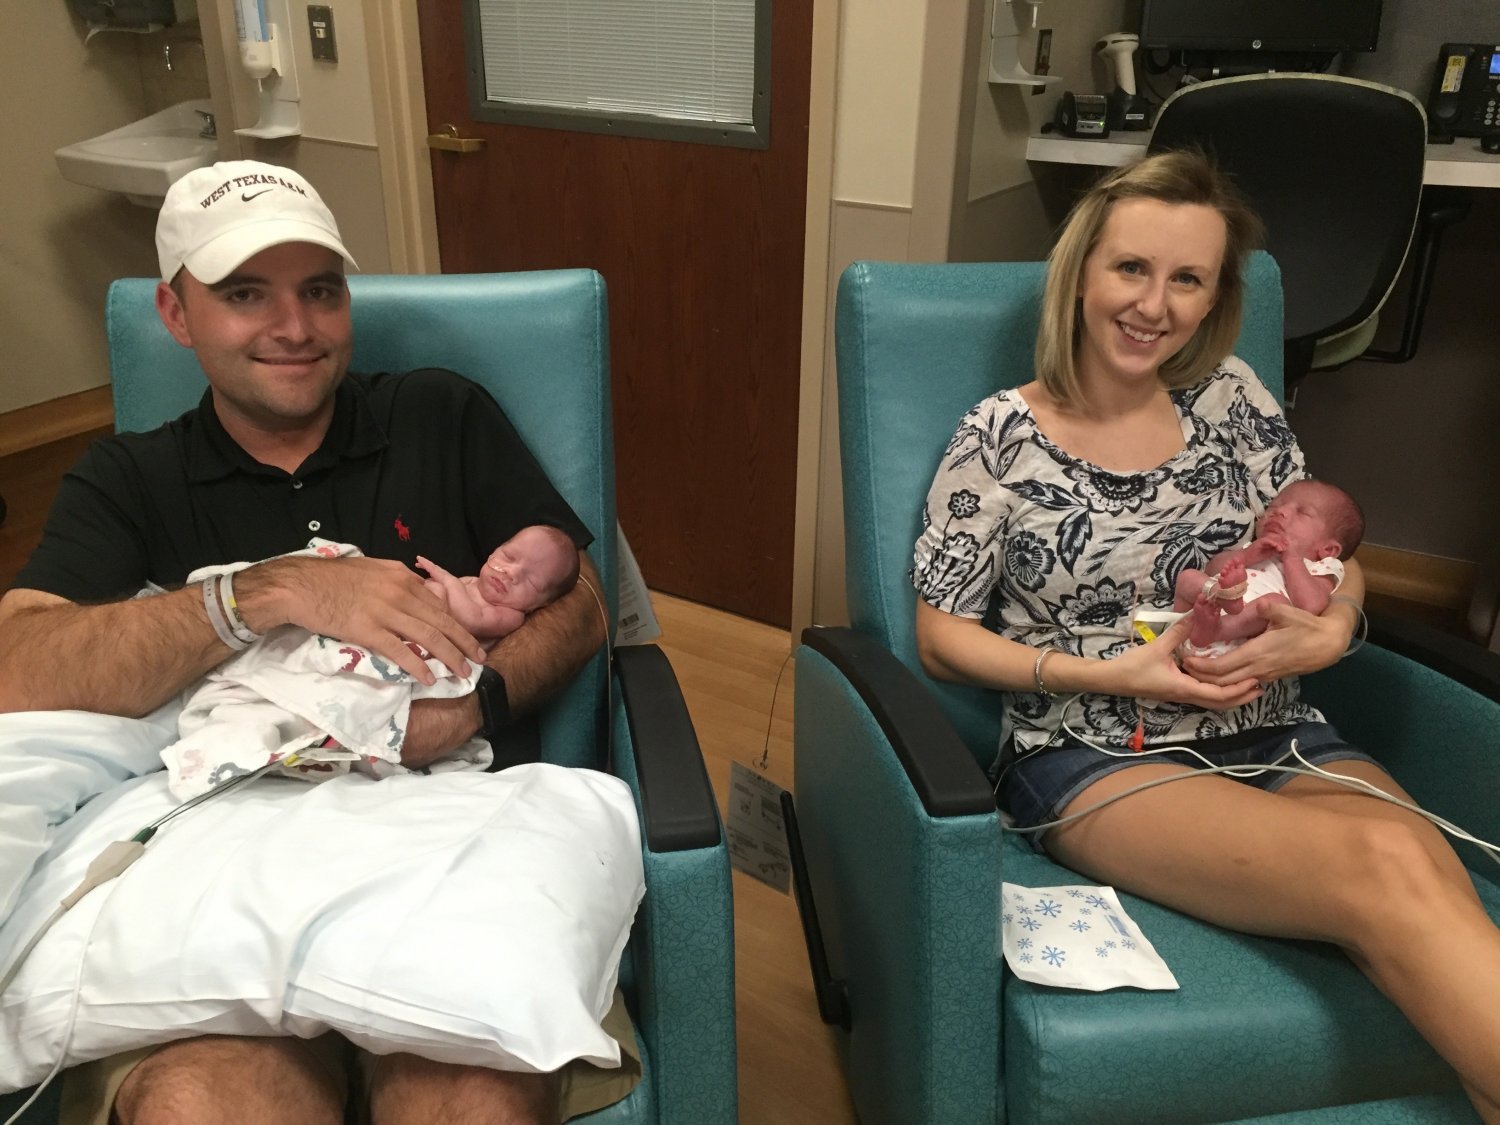 Mother and father each holding one twin daughter in hospital